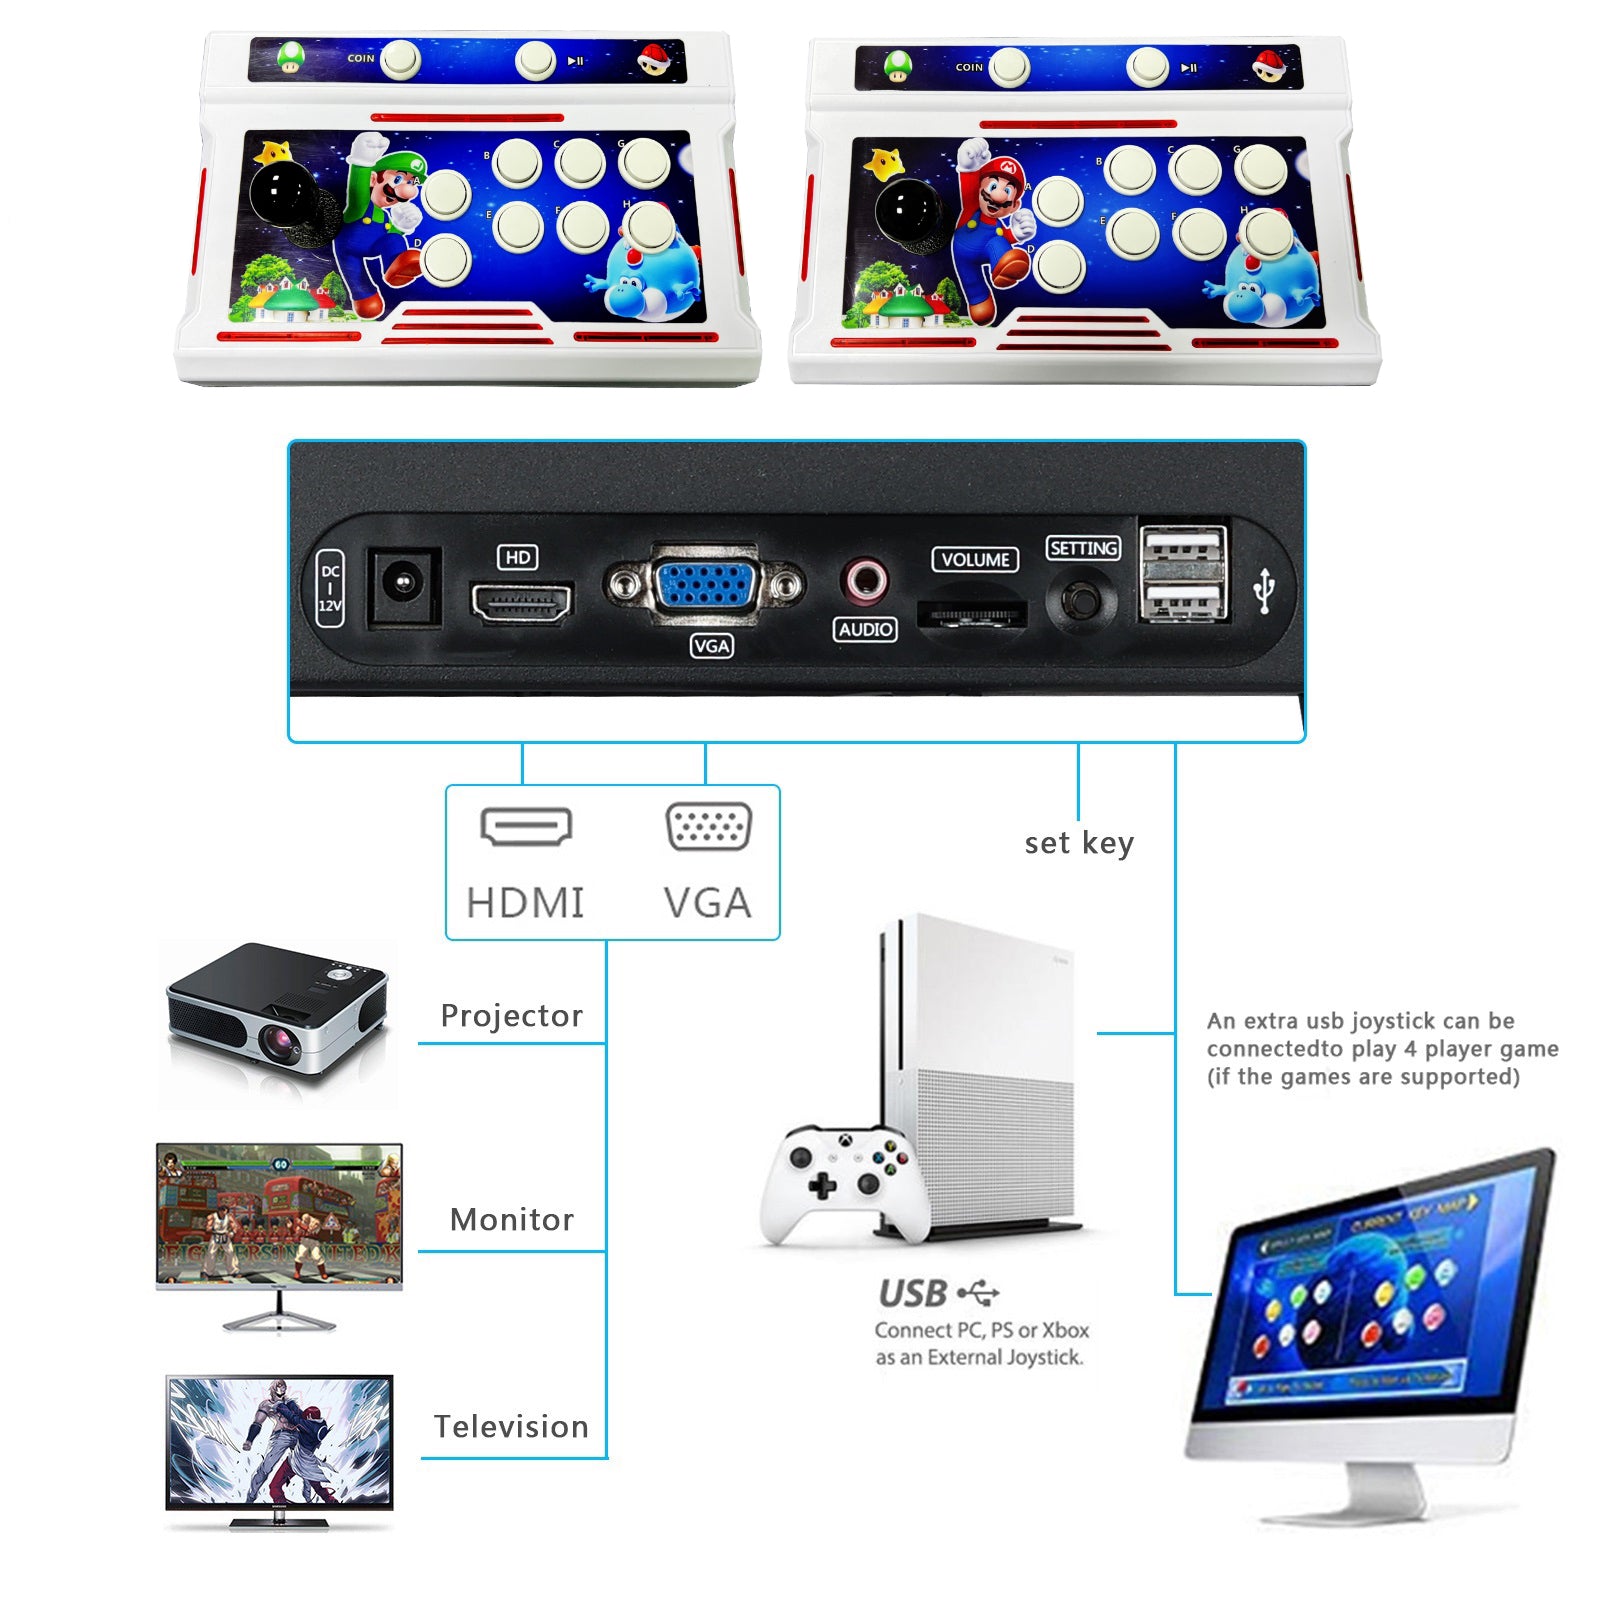  HAAMIIQII 3D Pandora Box 50s Arcade Game Console, 20000 Games  Installed, WiFi Function, 1280x720 Full HD Video, Search/Save/Hide/Pause/ Download Games, 1-4 Players Online Game, HDMI VGA USB Output : Toys & Games